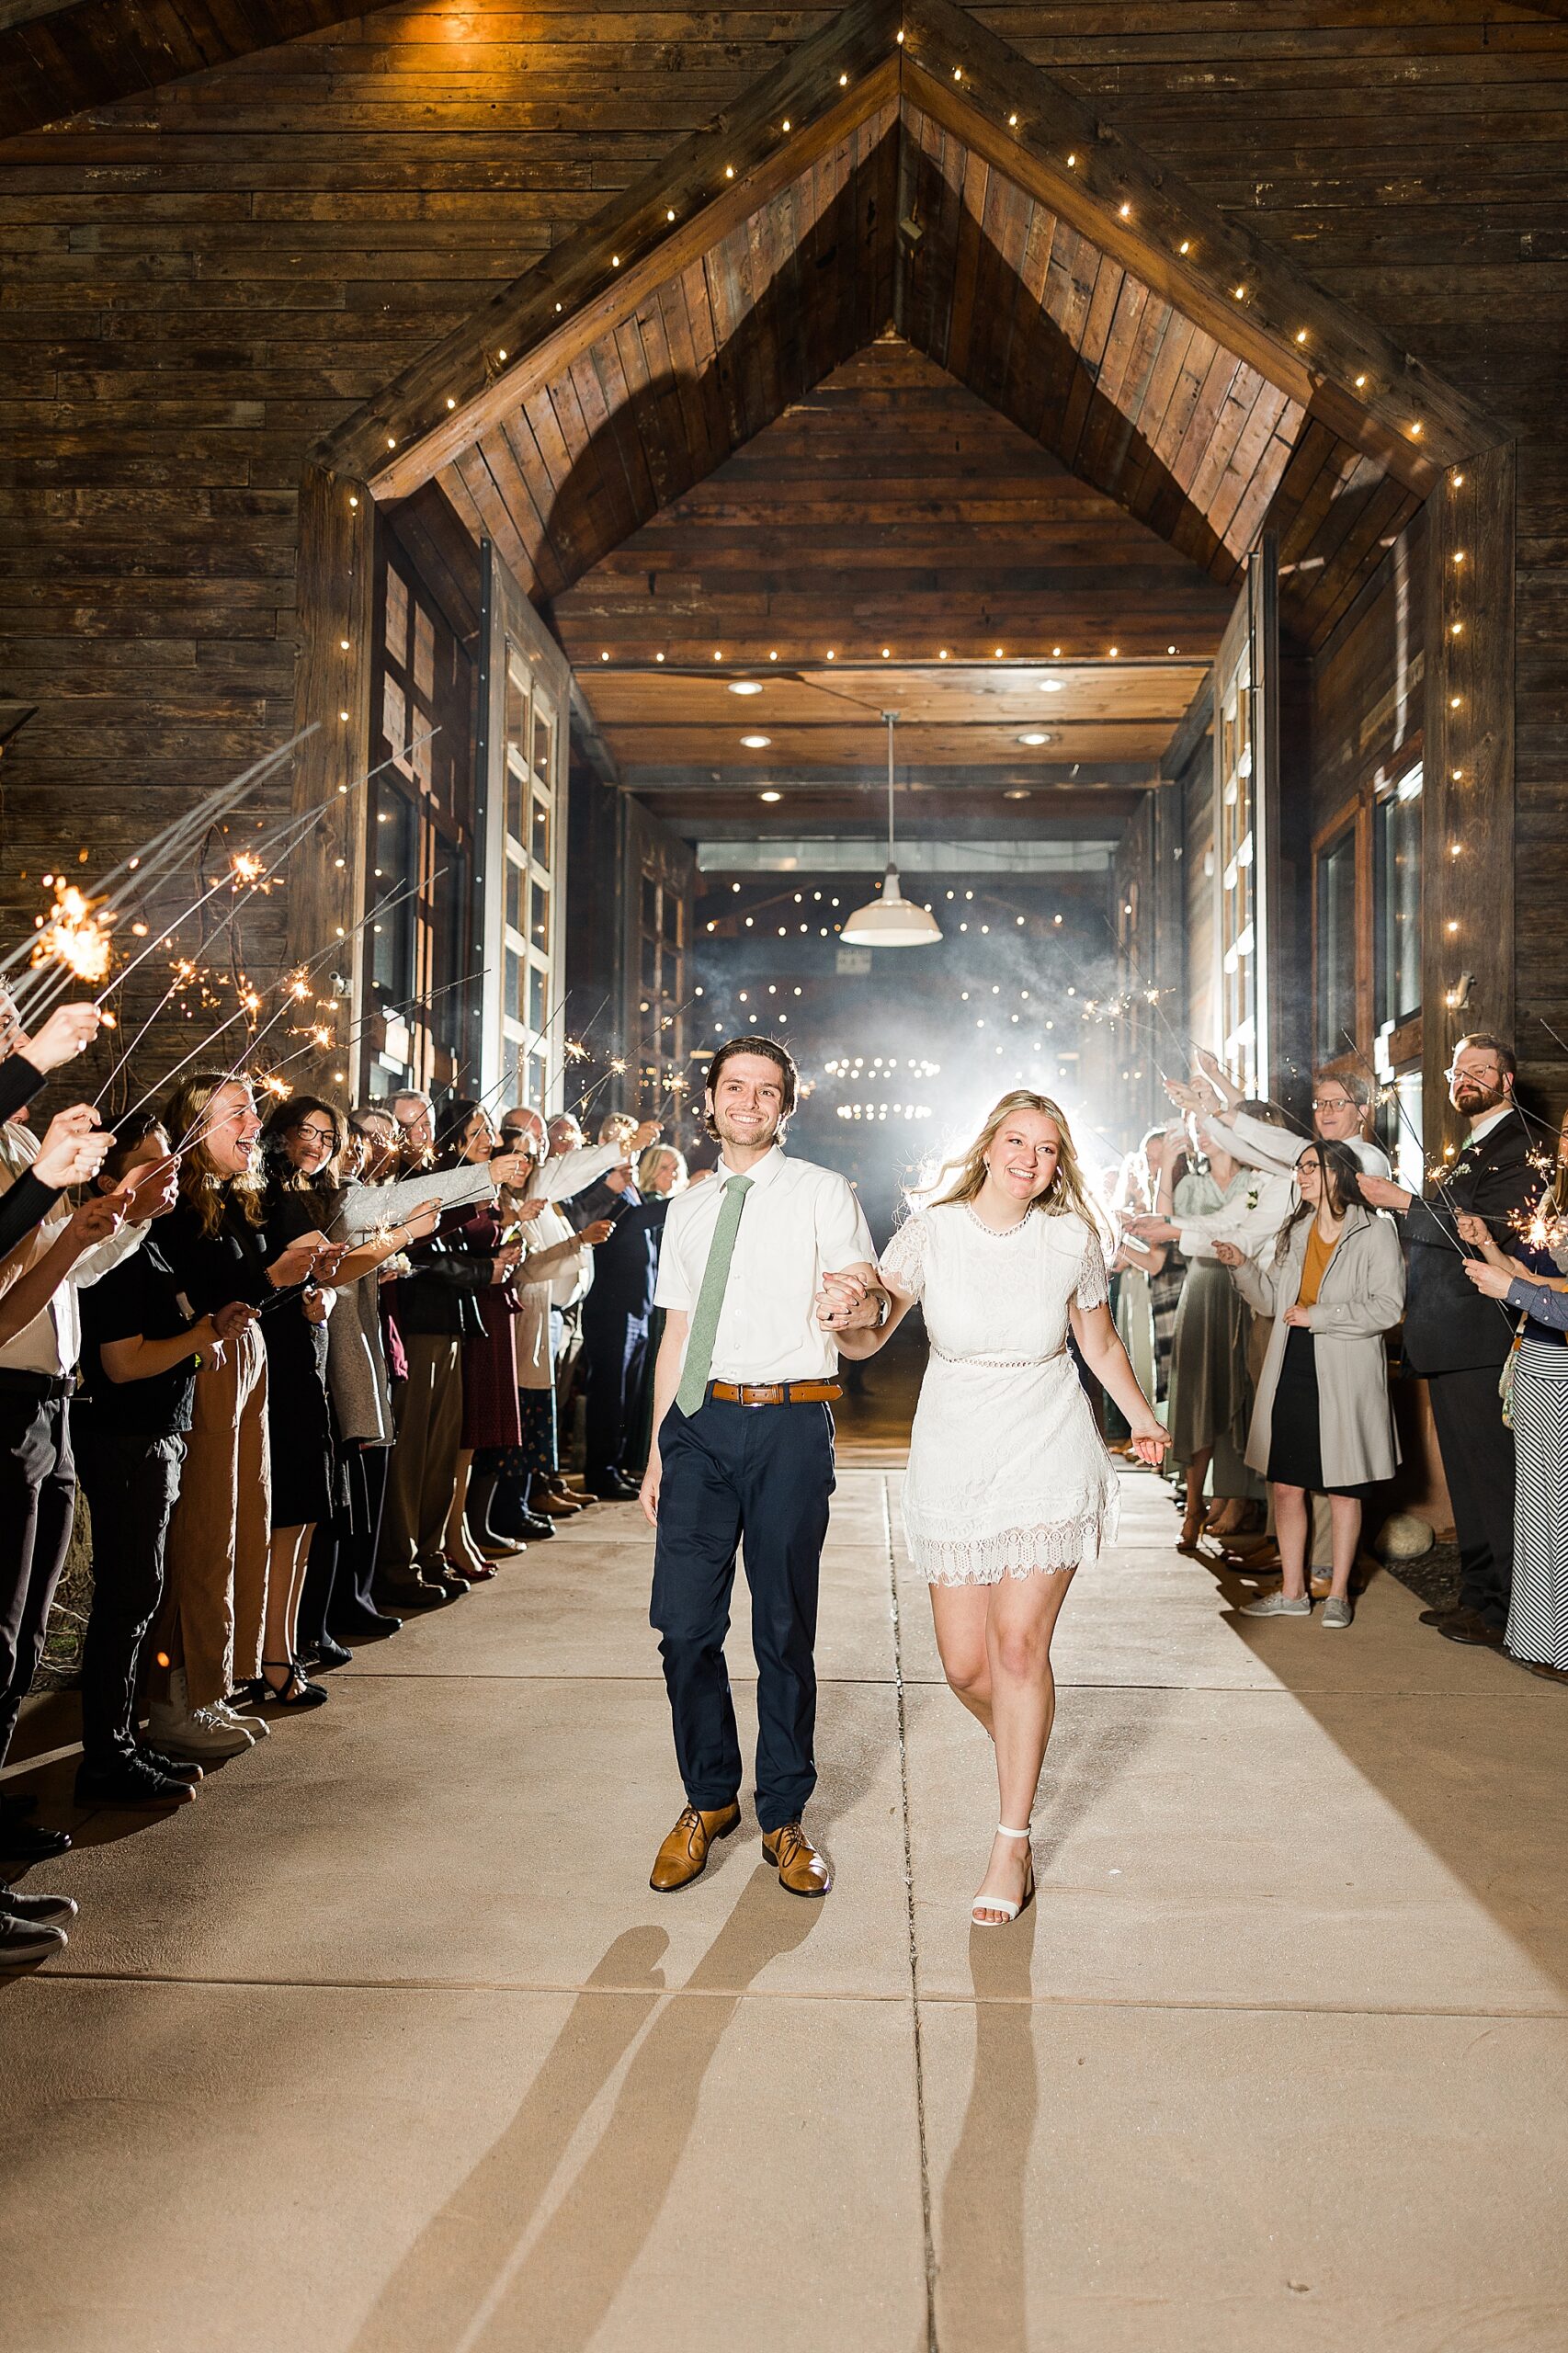 Guests lined up on both sides of the exit path, holding sparklers
